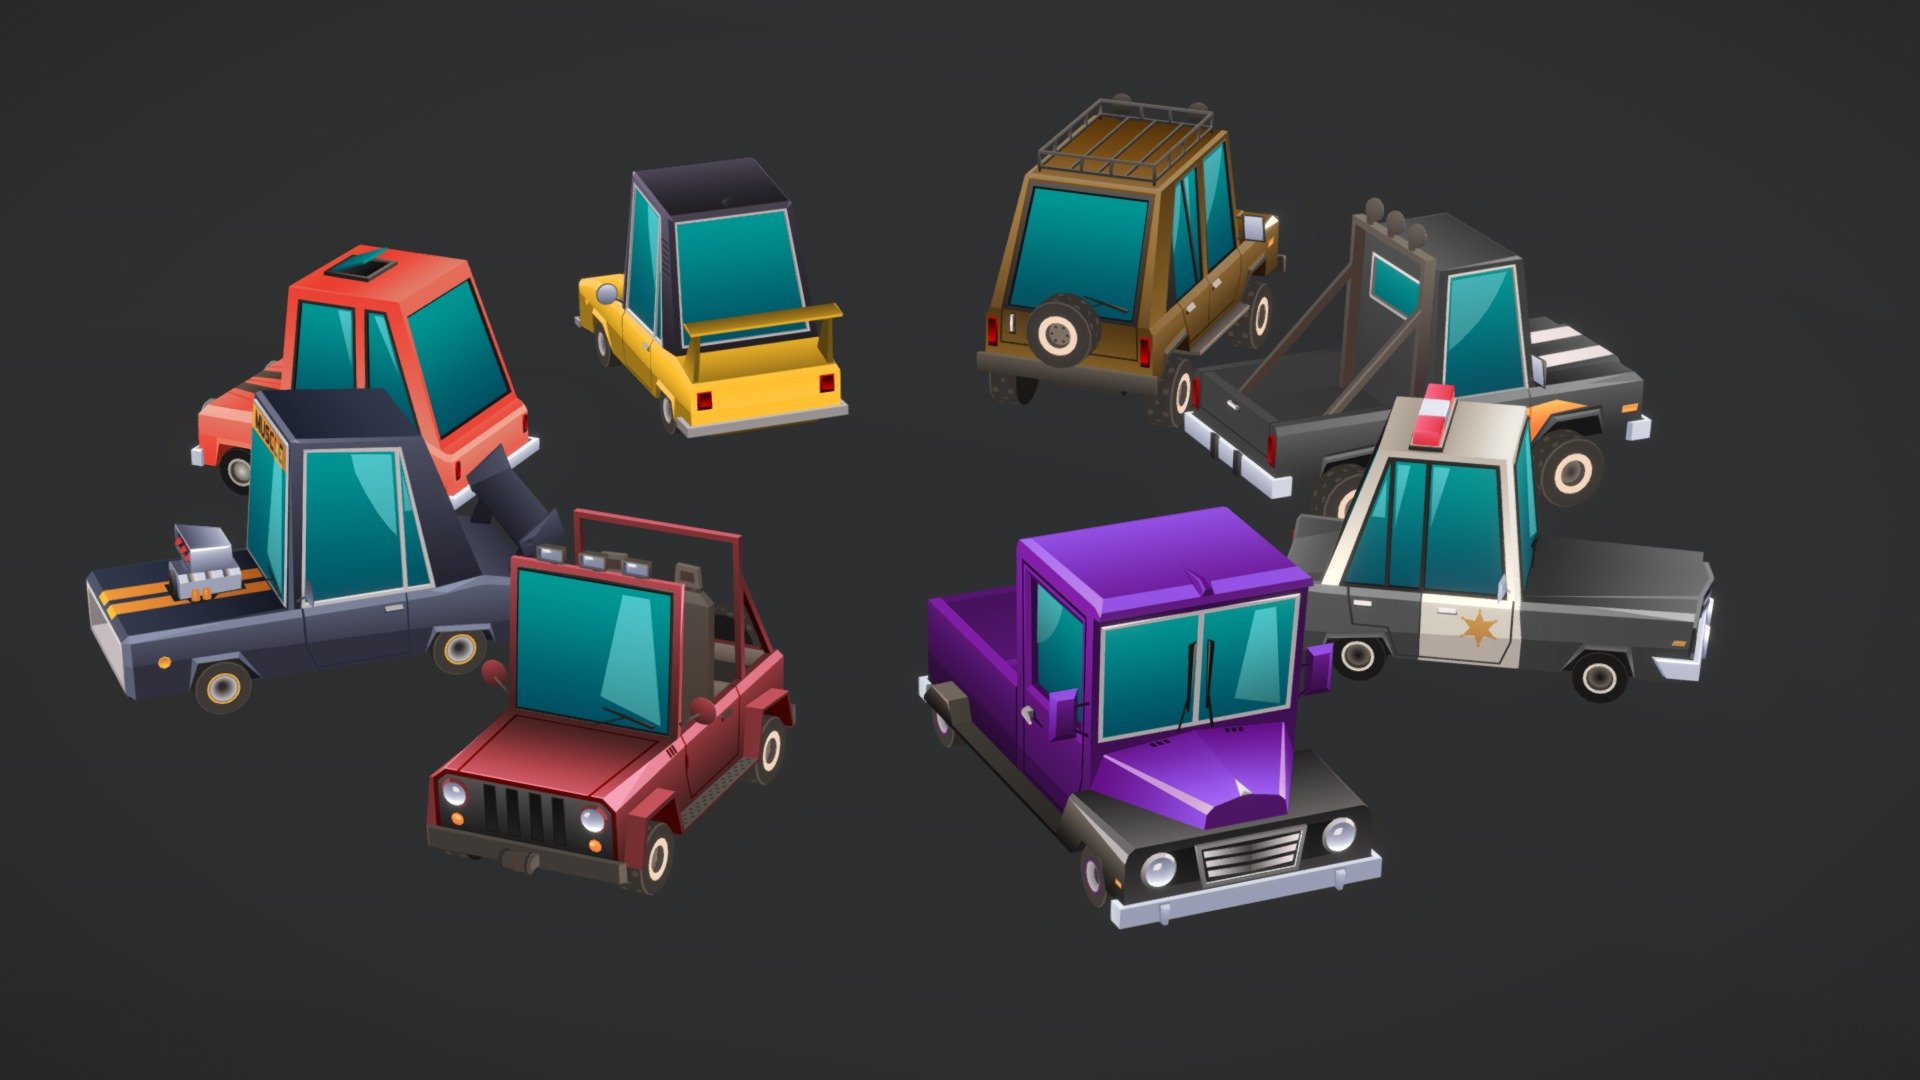 Low-poly cartoon style cars. It was really enjoyable to create these cars. 
Made with blender 3d model